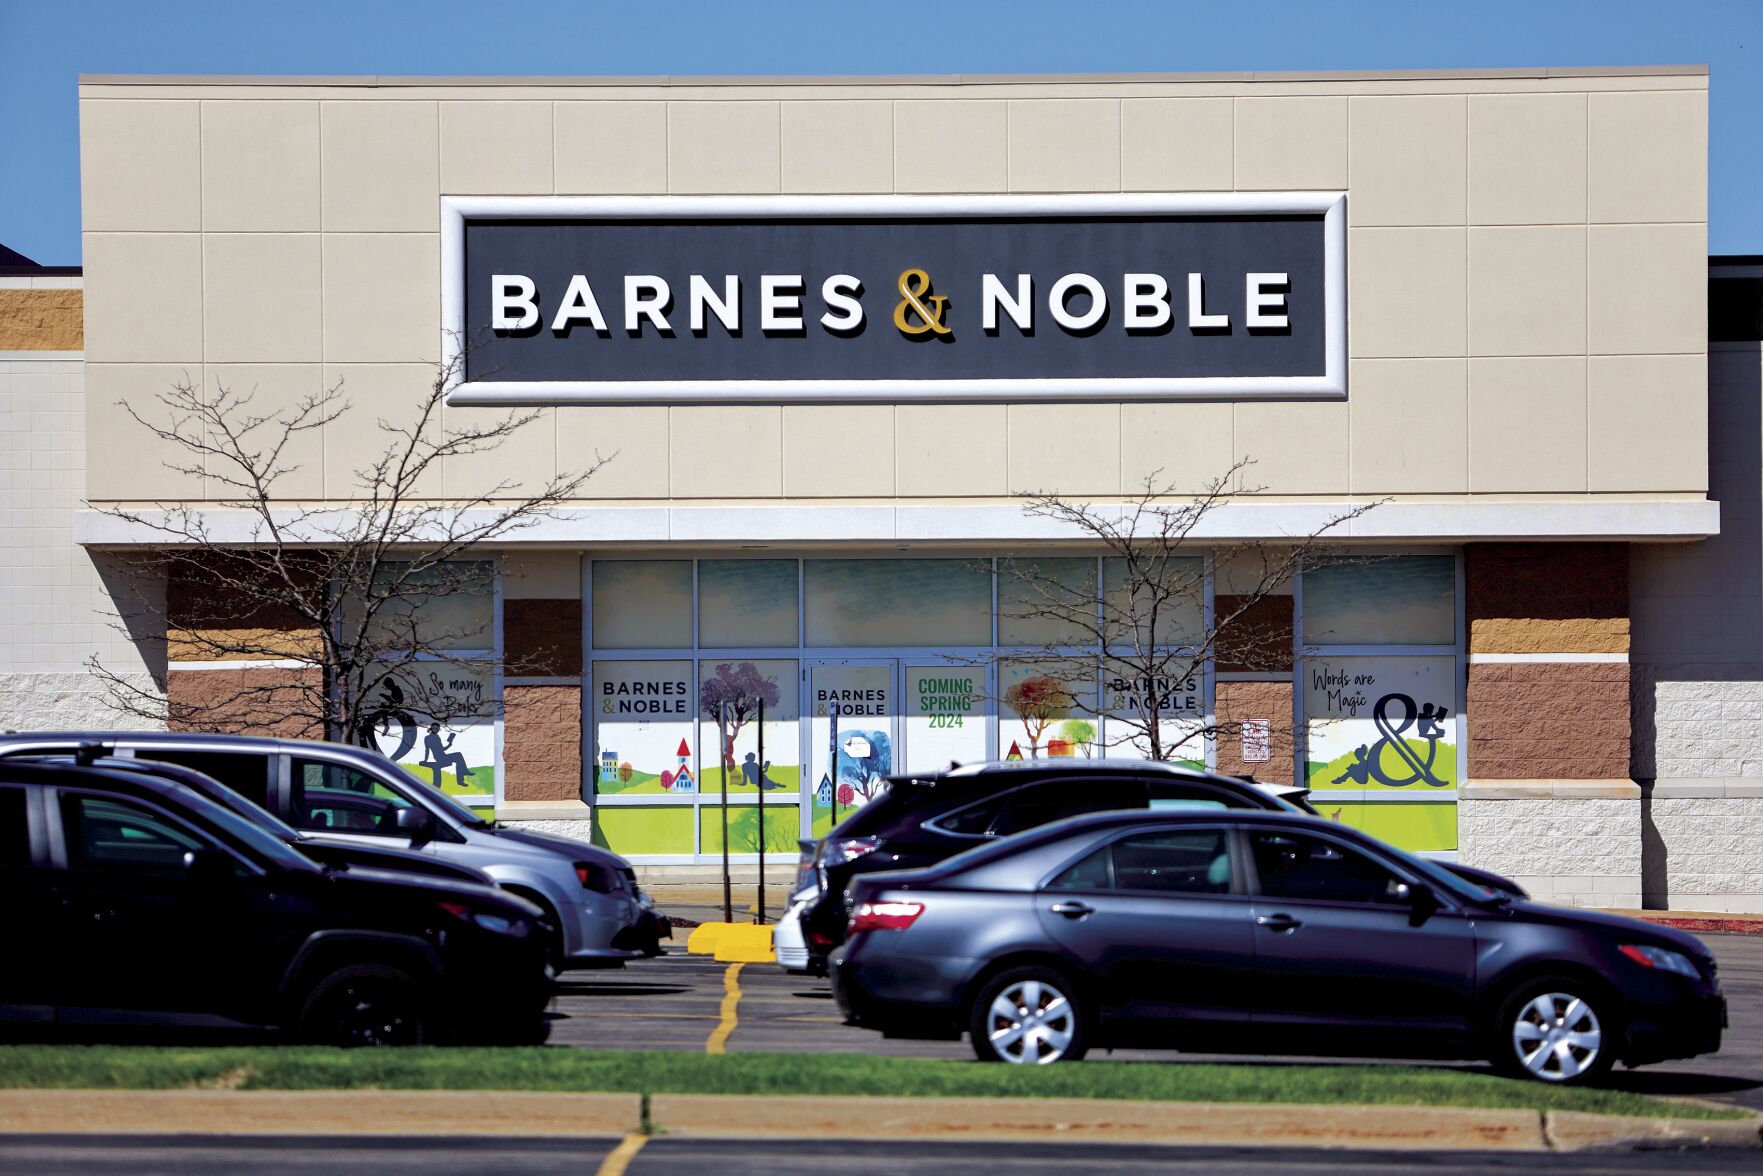 Barnes & Noble will open at Asbury Plaza on May 1.    PHOTO CREDIT: Dave Kettering